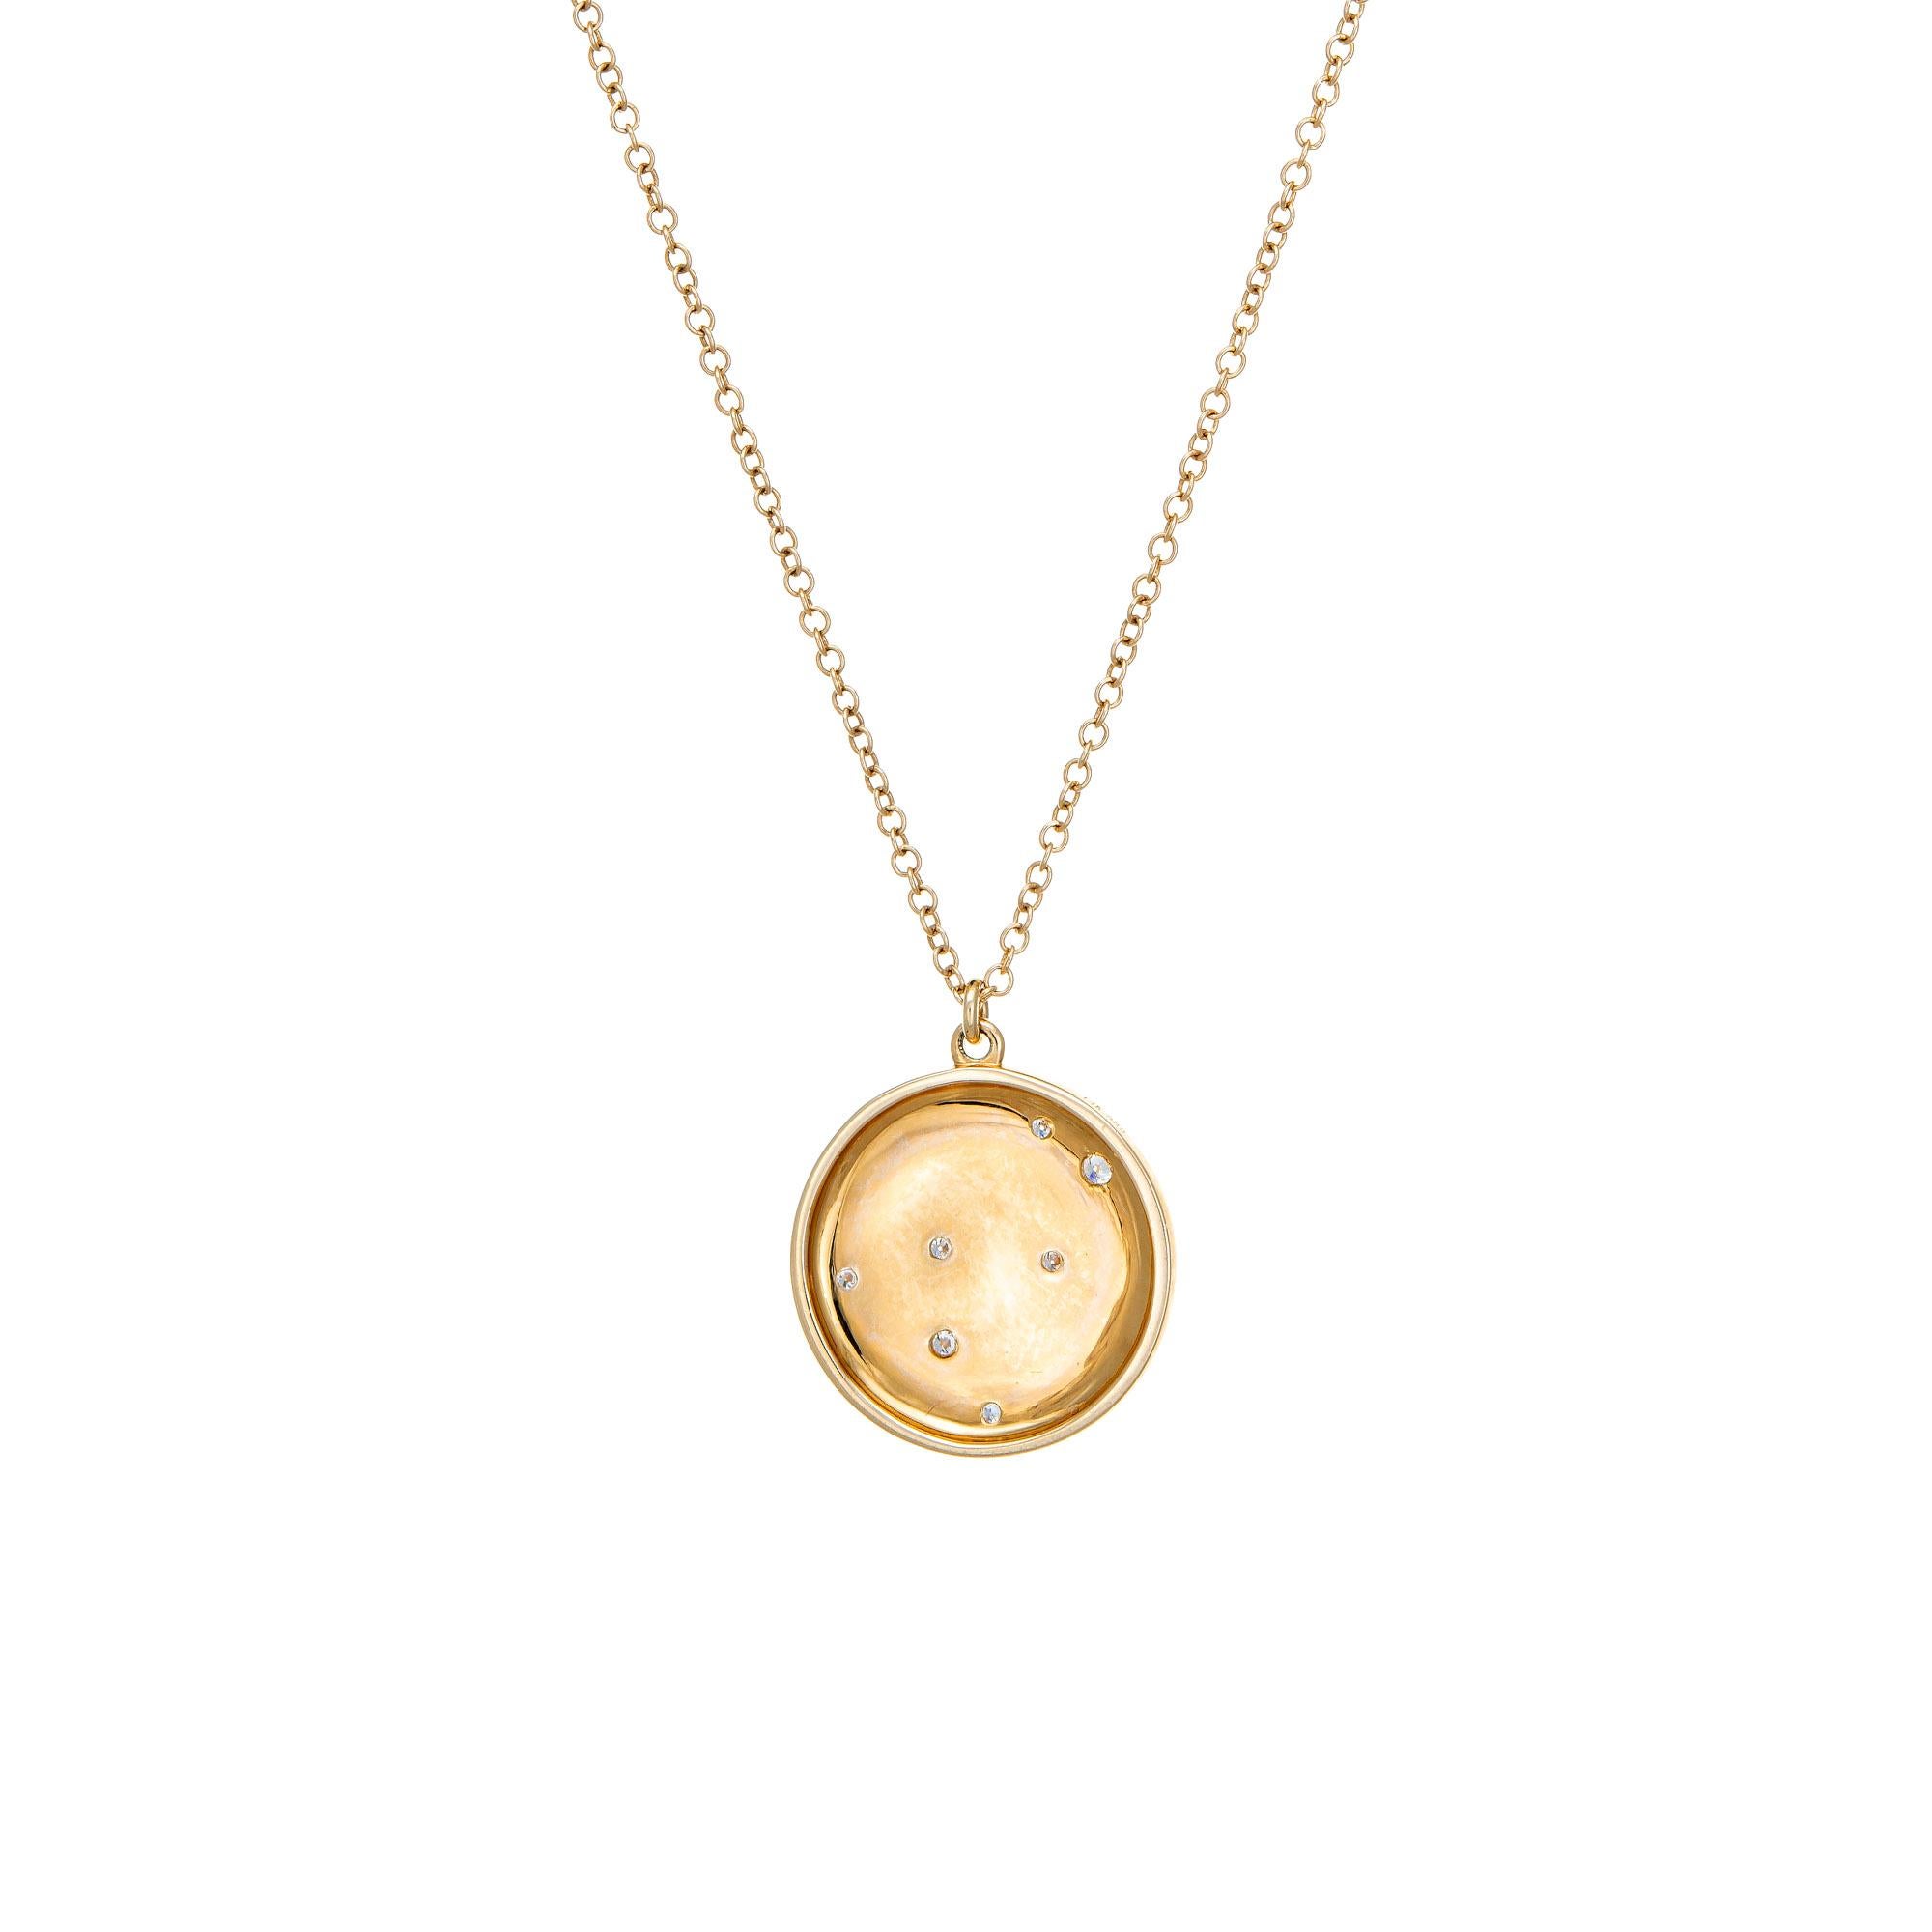 Stylish and finely detailed Gemini constellation necklace crafted in 14 karat yellow gold.

Diamonds total an estimated 0.06 carats (estimated at G-H color and VS2-SI1 clarity).

The Northern zodiac constellation is set with diamonds in a small